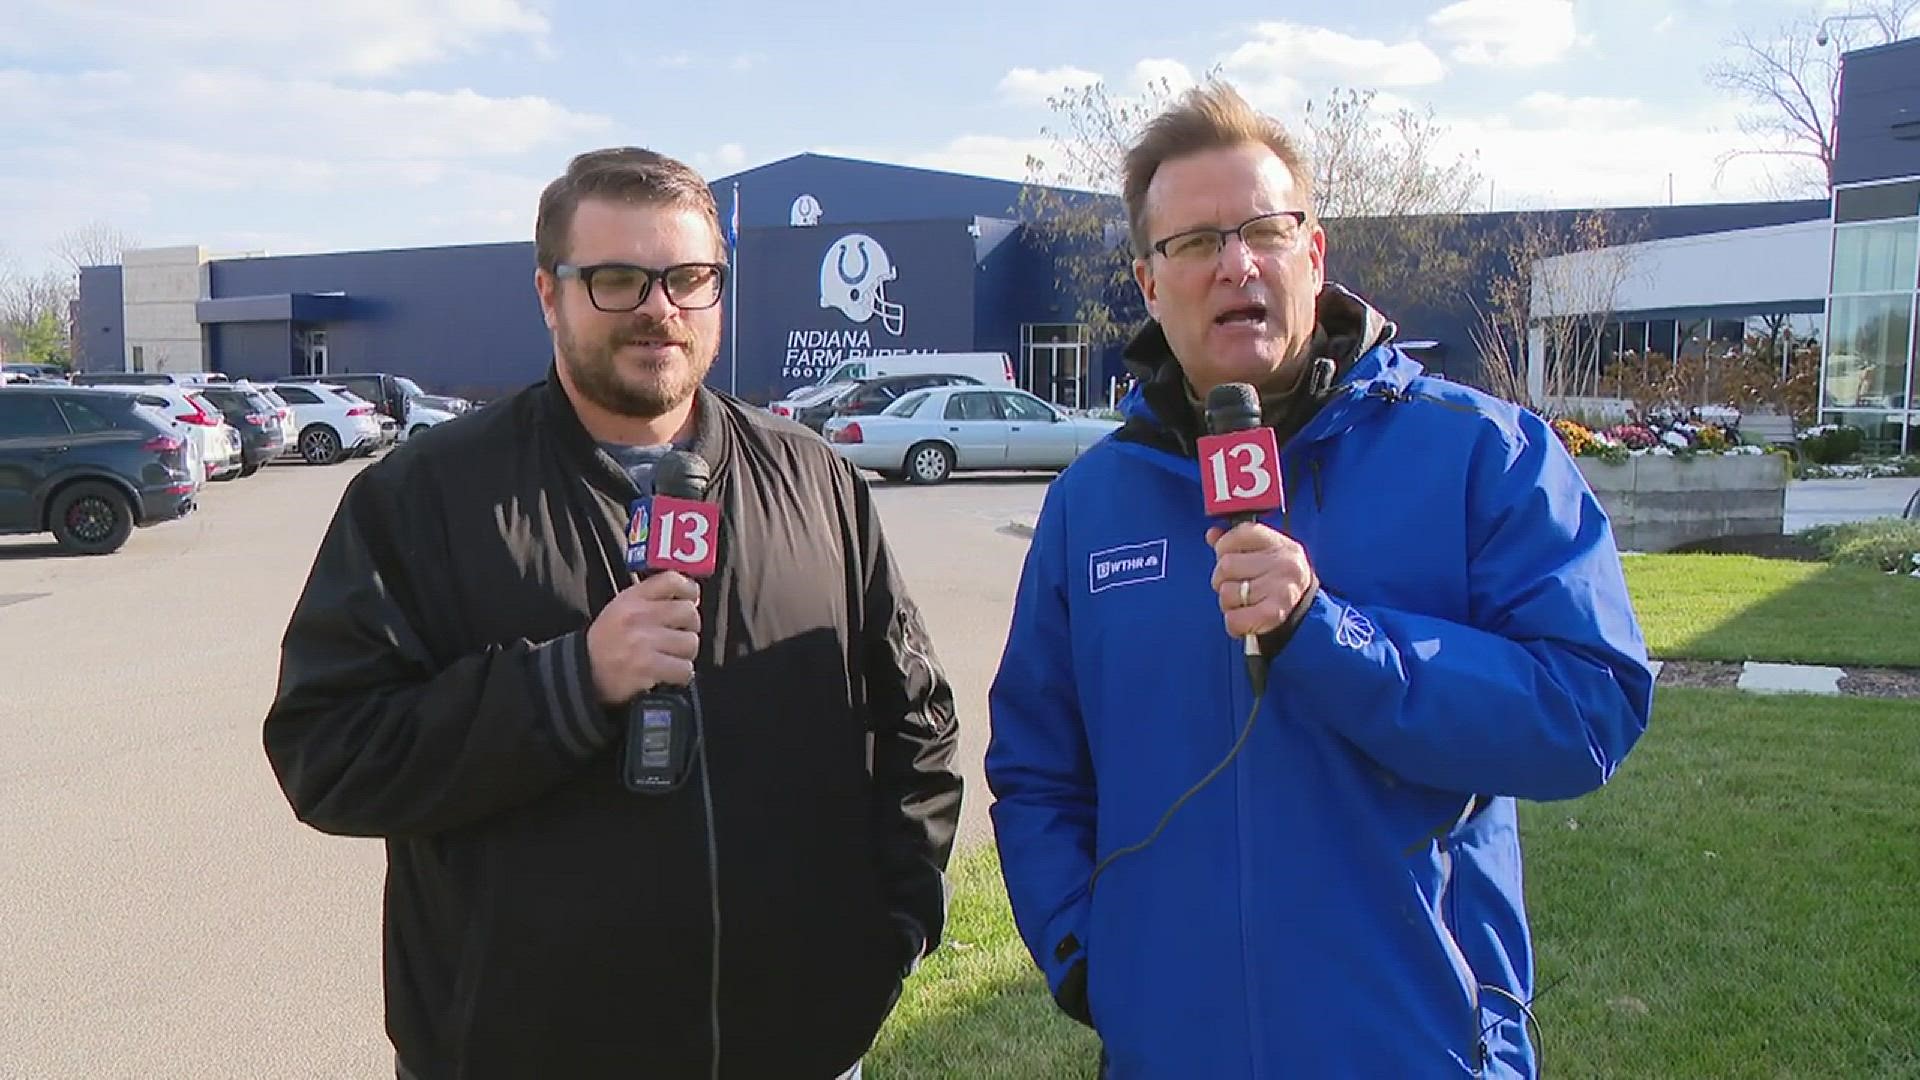 13Sports director Dave Calabro and Locked On Colts host Jake Arthur discuss the Indianapolis Colts' win over the Las Vegas Raiders in Jeff Saturday's debut.